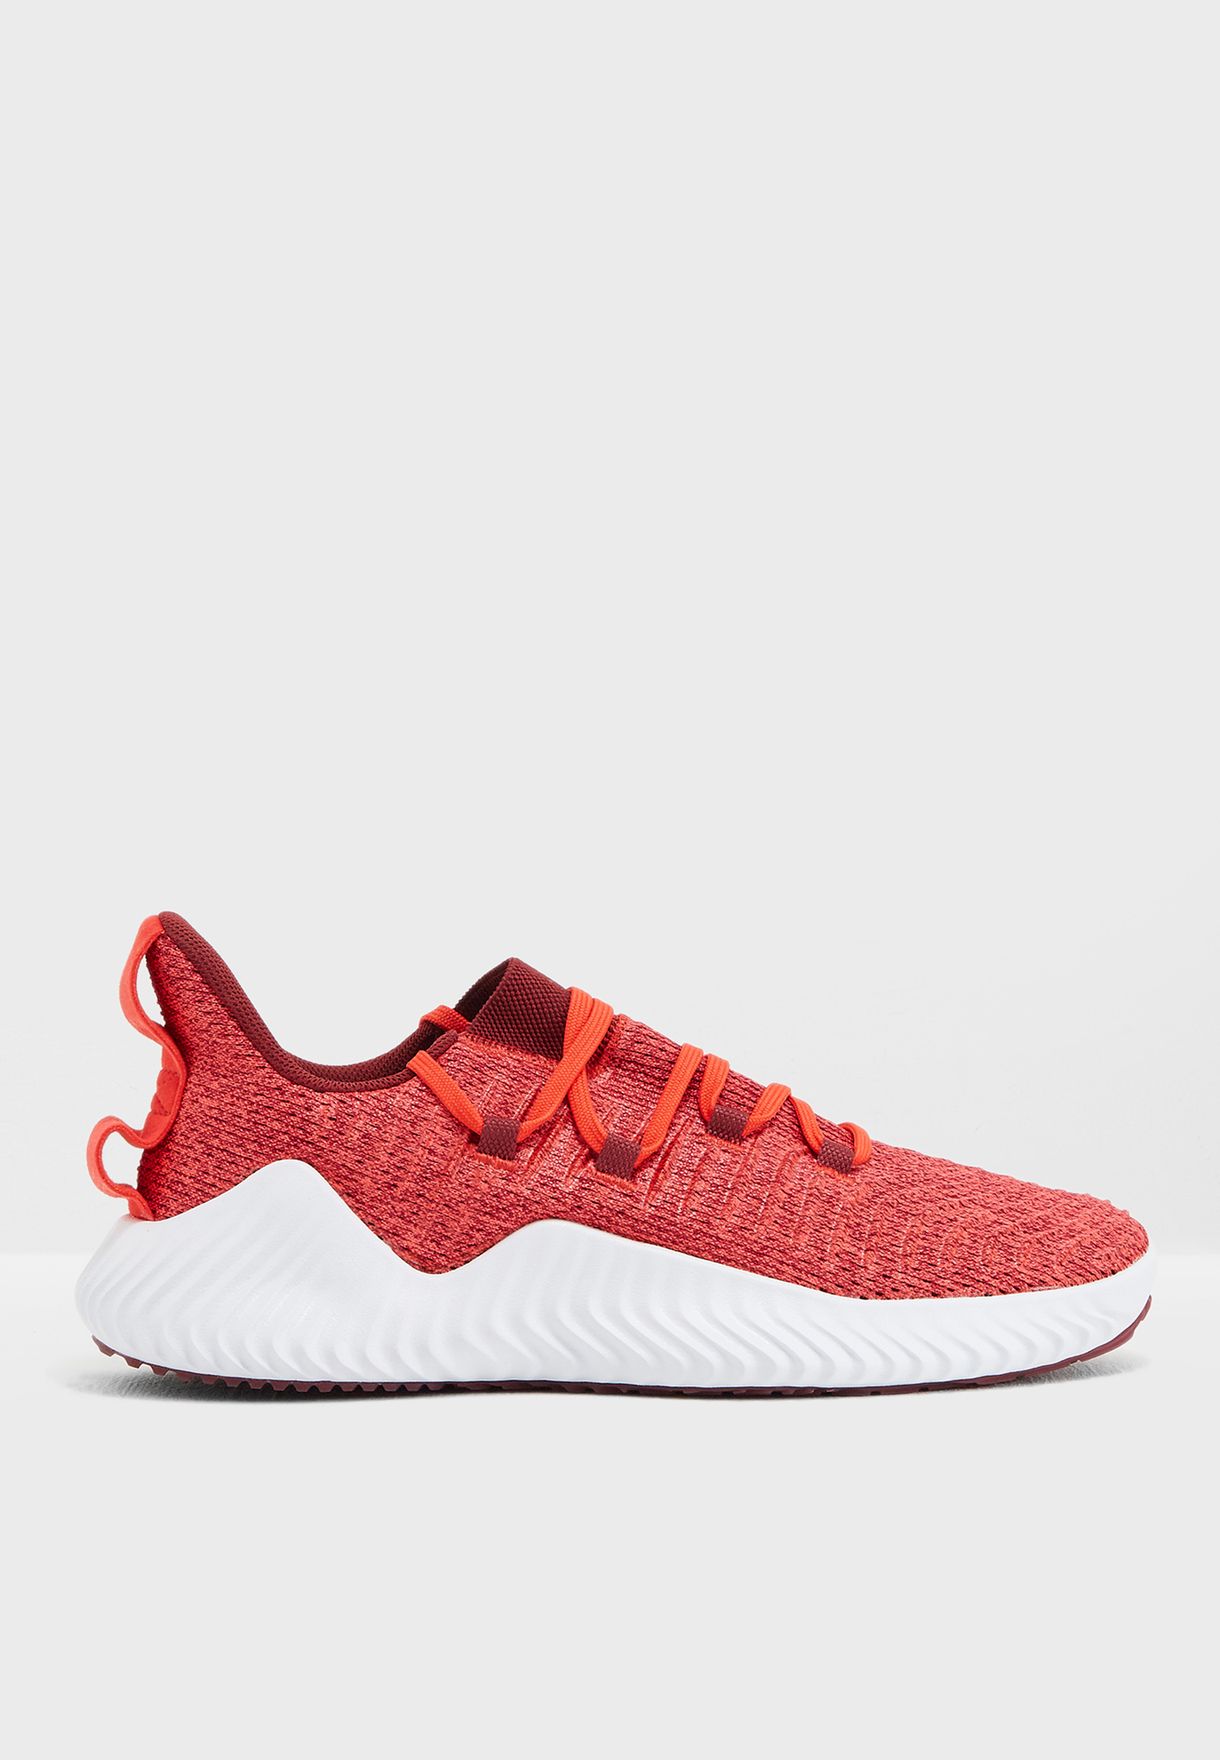 adidas alphabounce trainer red